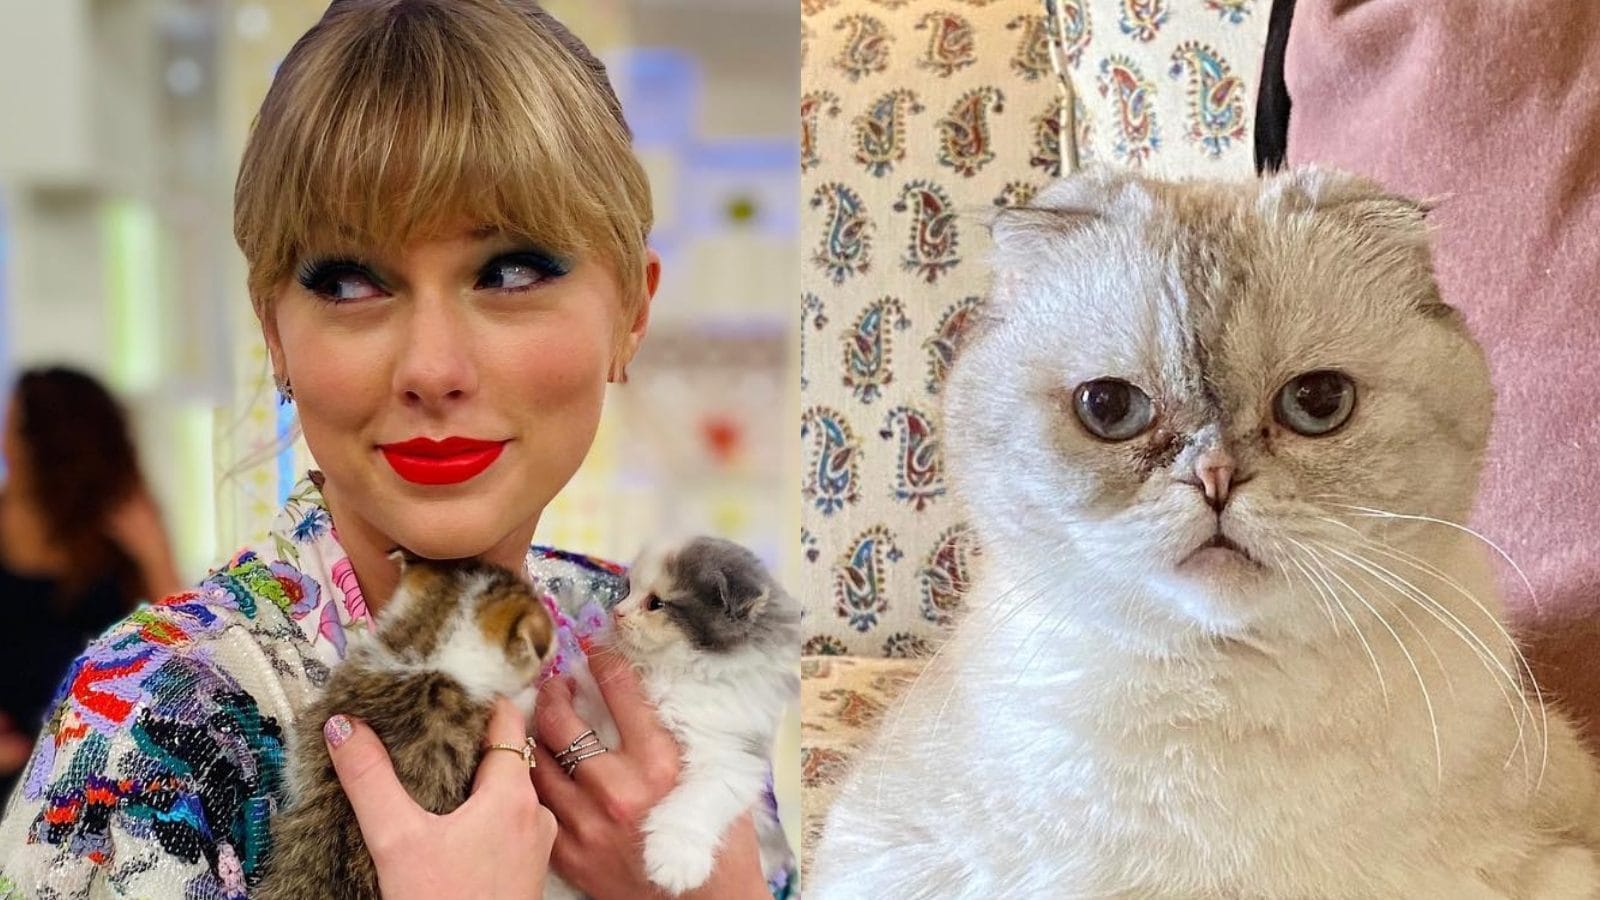 Taylor Swift's Cat Olivia Is One of the Wealthiest Pets, Reportedly